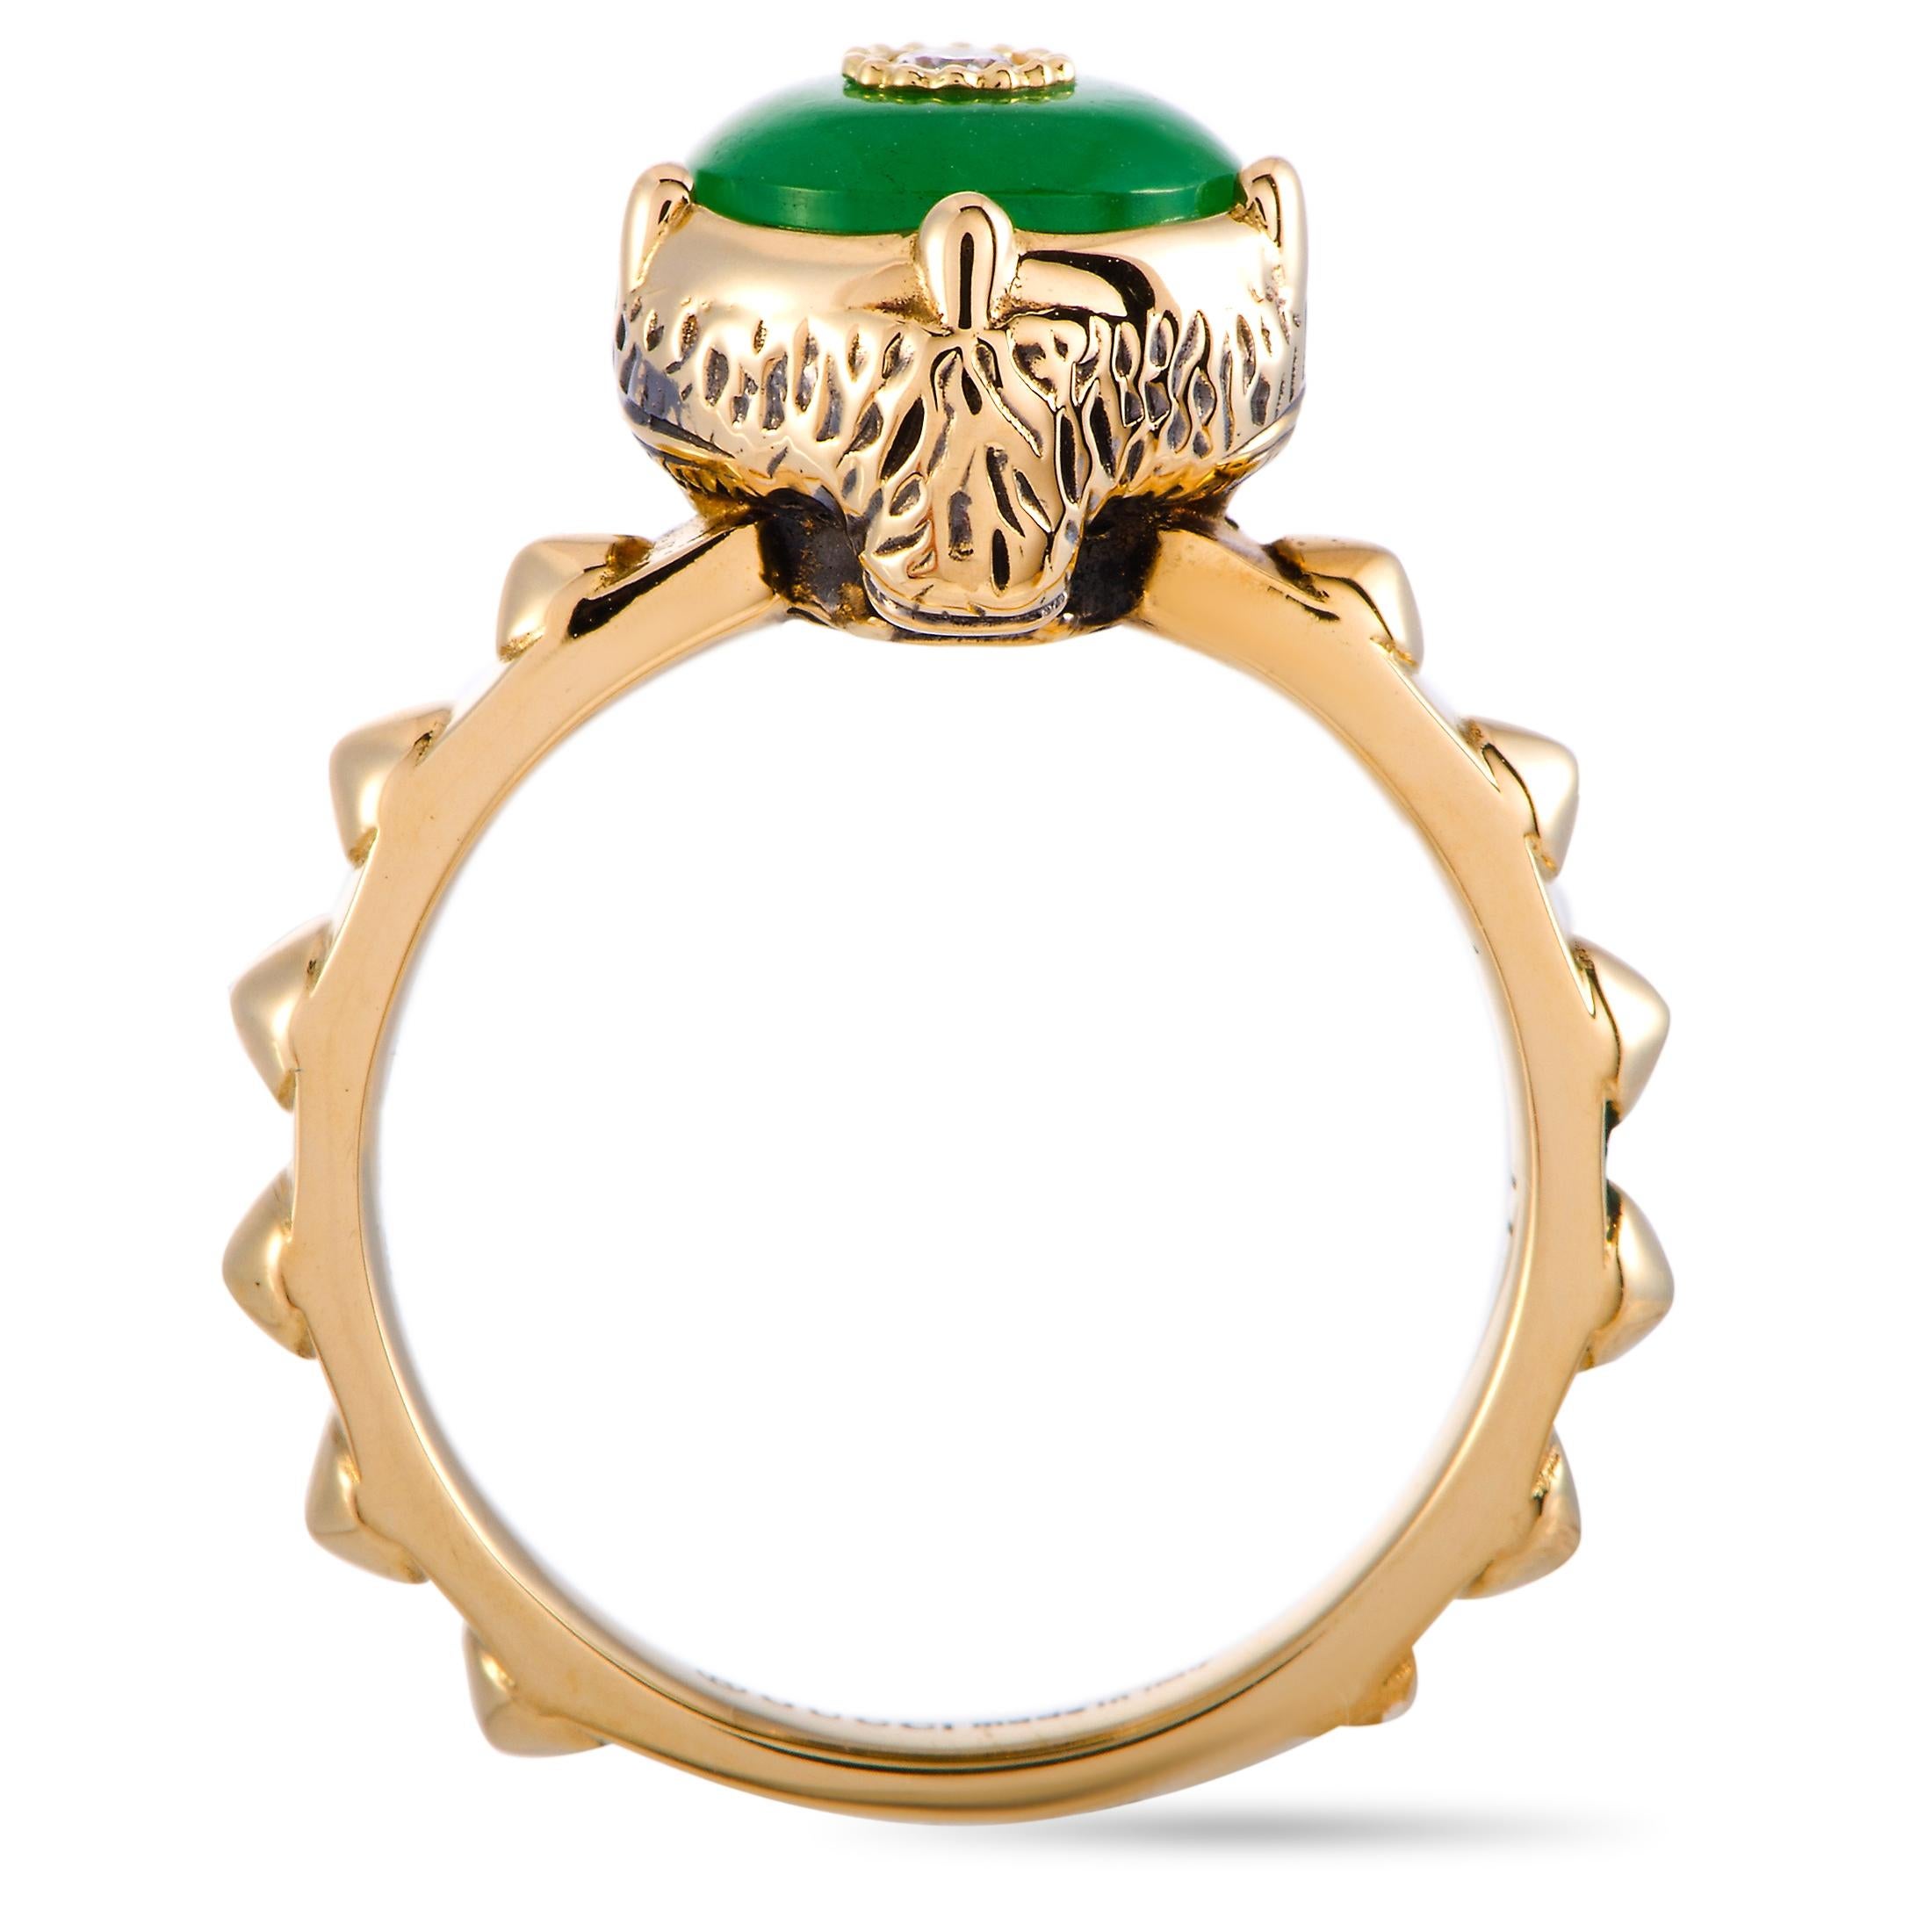 The “LMDM” ring by Gucci is crafted from 18K yellow gold and set with three diamond stones and a jade. The jade weighs approximately 1.45 carats and the diamonds feature GH color and VVS clarity and total approximately 0.05 carats. The ring weighs